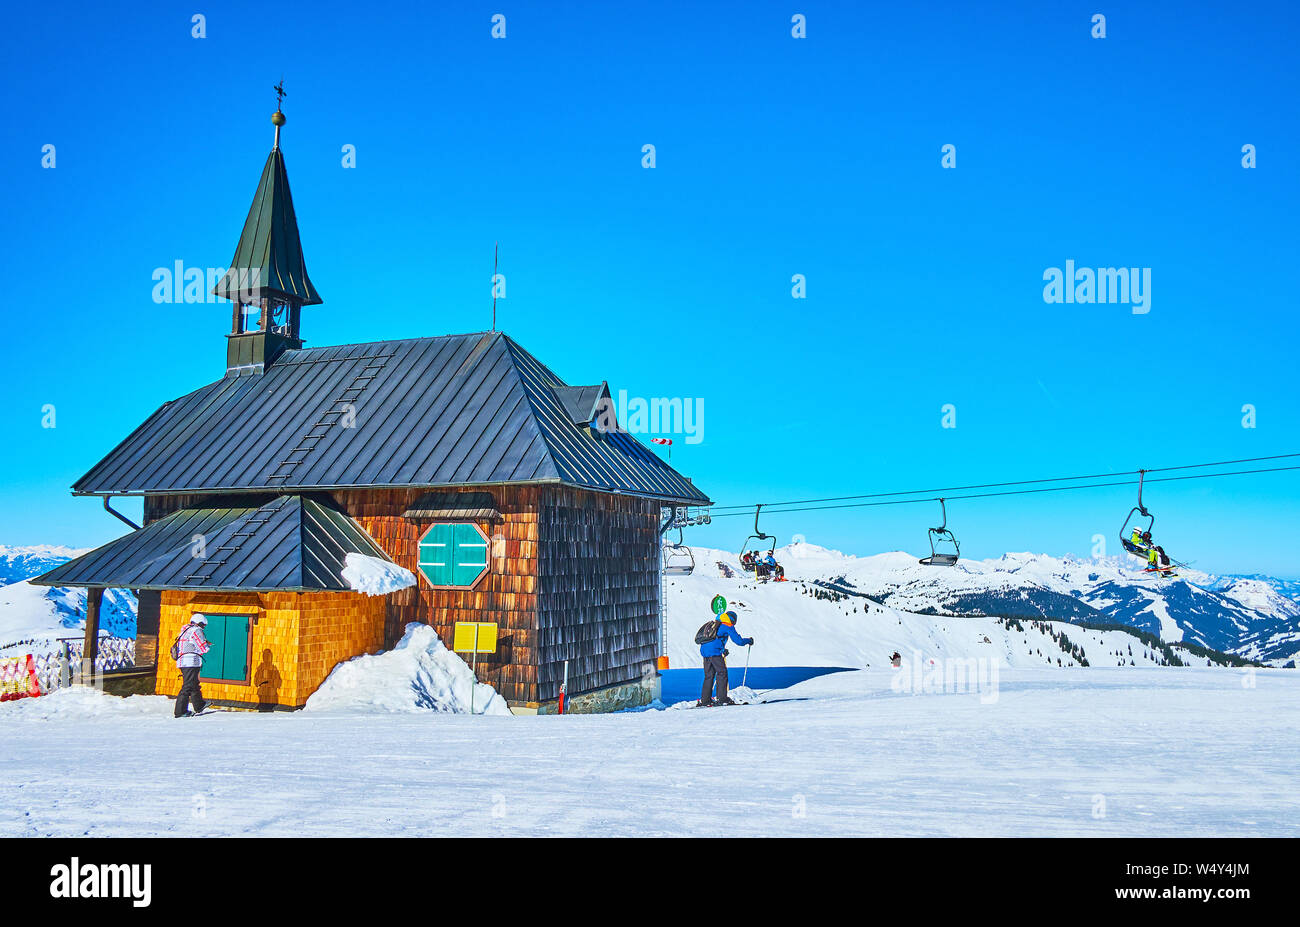 The snowy Alpine scenery and riding chairlift with sportsmen behind the old wooden Elisabeth chapel, located atop the Schmitten mount, Zell am See, Au Stock Photo